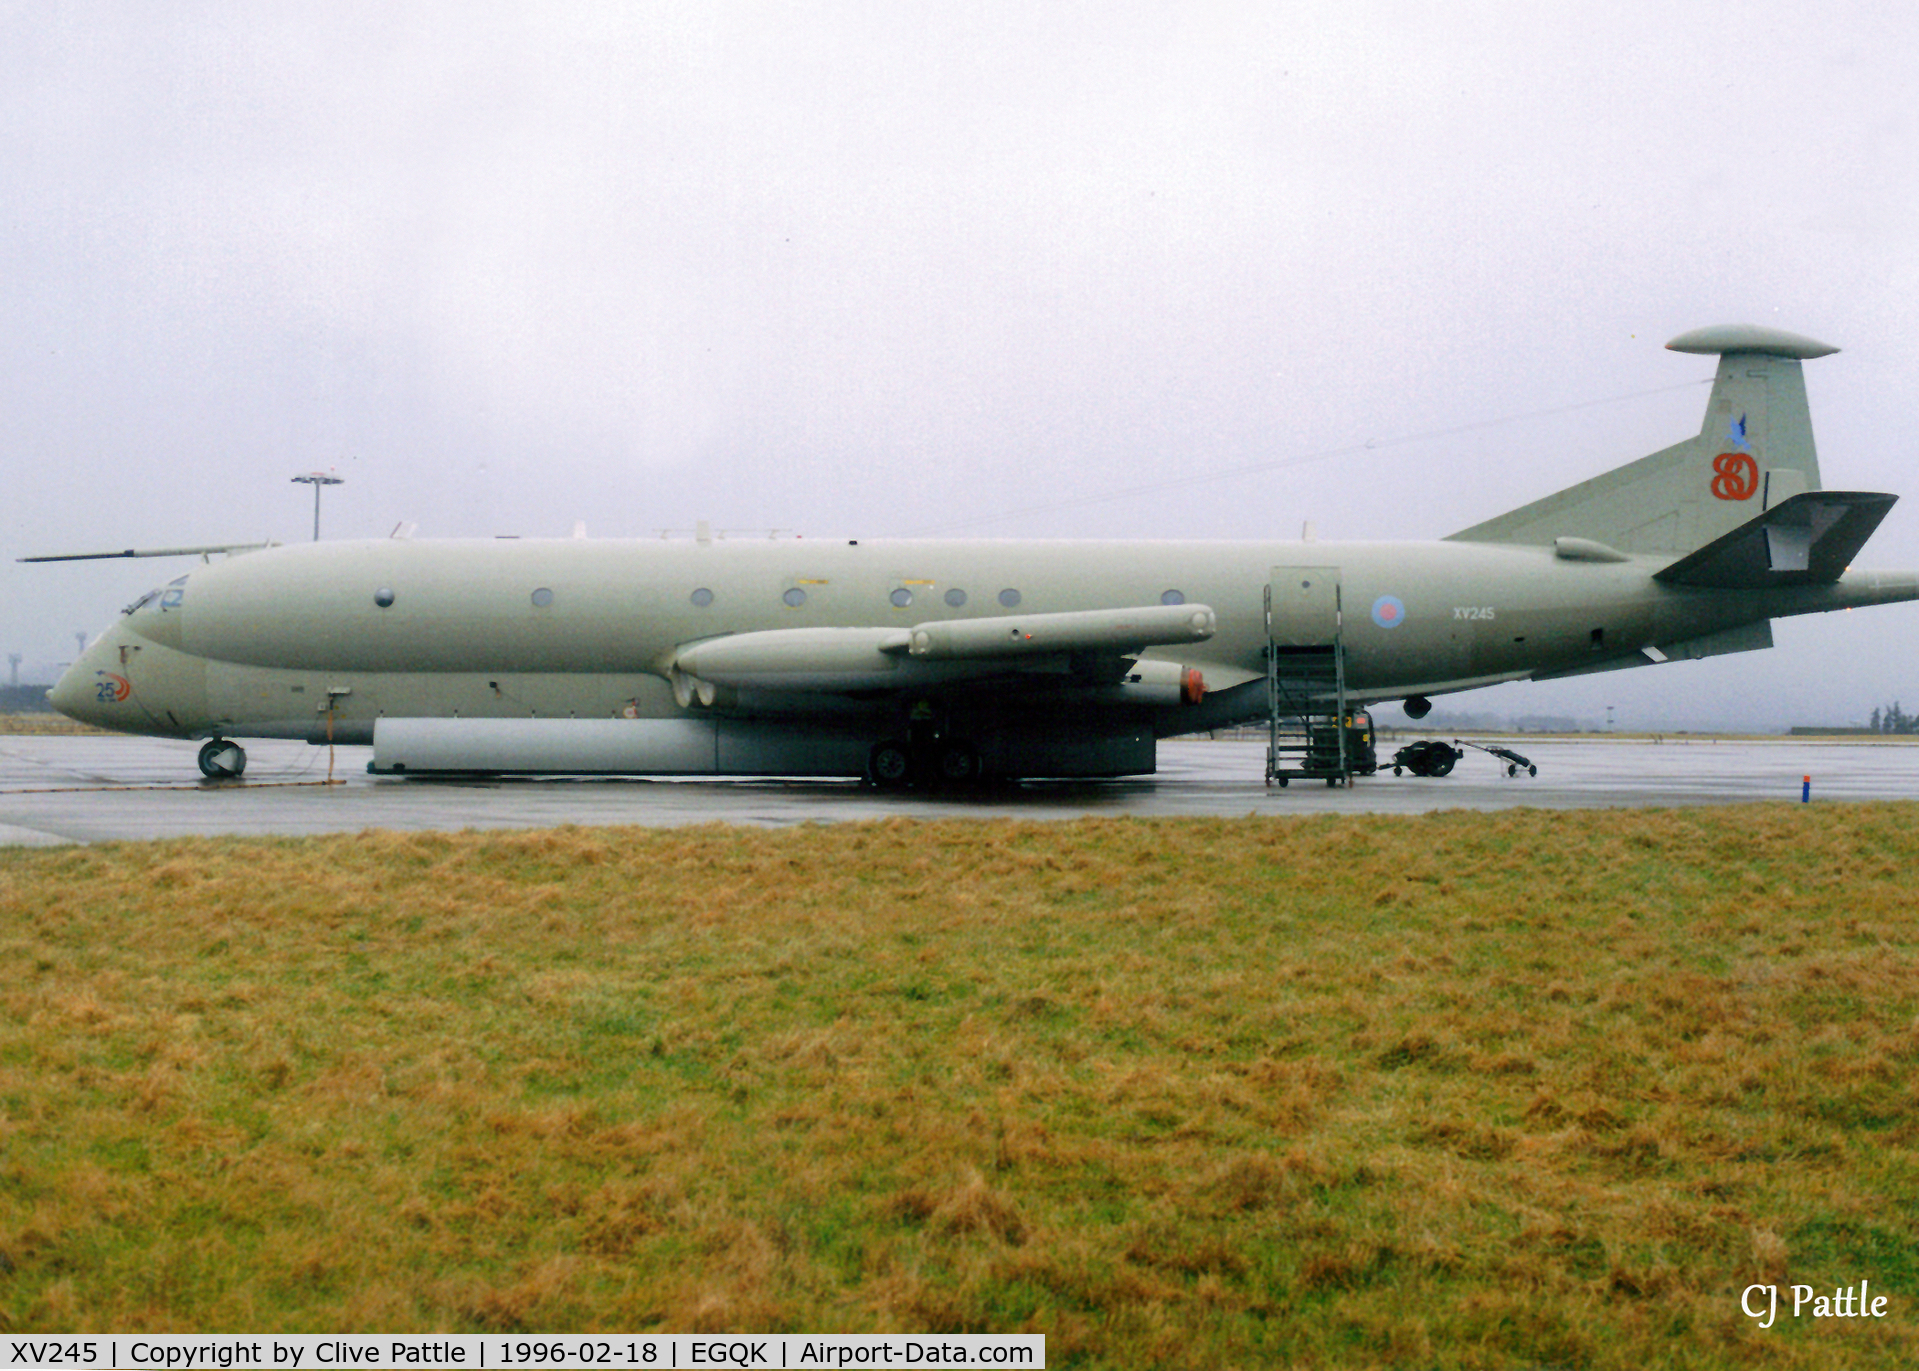 XV245, 1971 Hawker Siddeley Nimrod MR.1 (HS-801) C/N 8020, Scanned from print - Nimrod MR.2 XV245 in double  Special Anniversary Marks at RAF Kinloss in Feb '96, 25 years of Nimrod Ops and 80 years at Kinloss